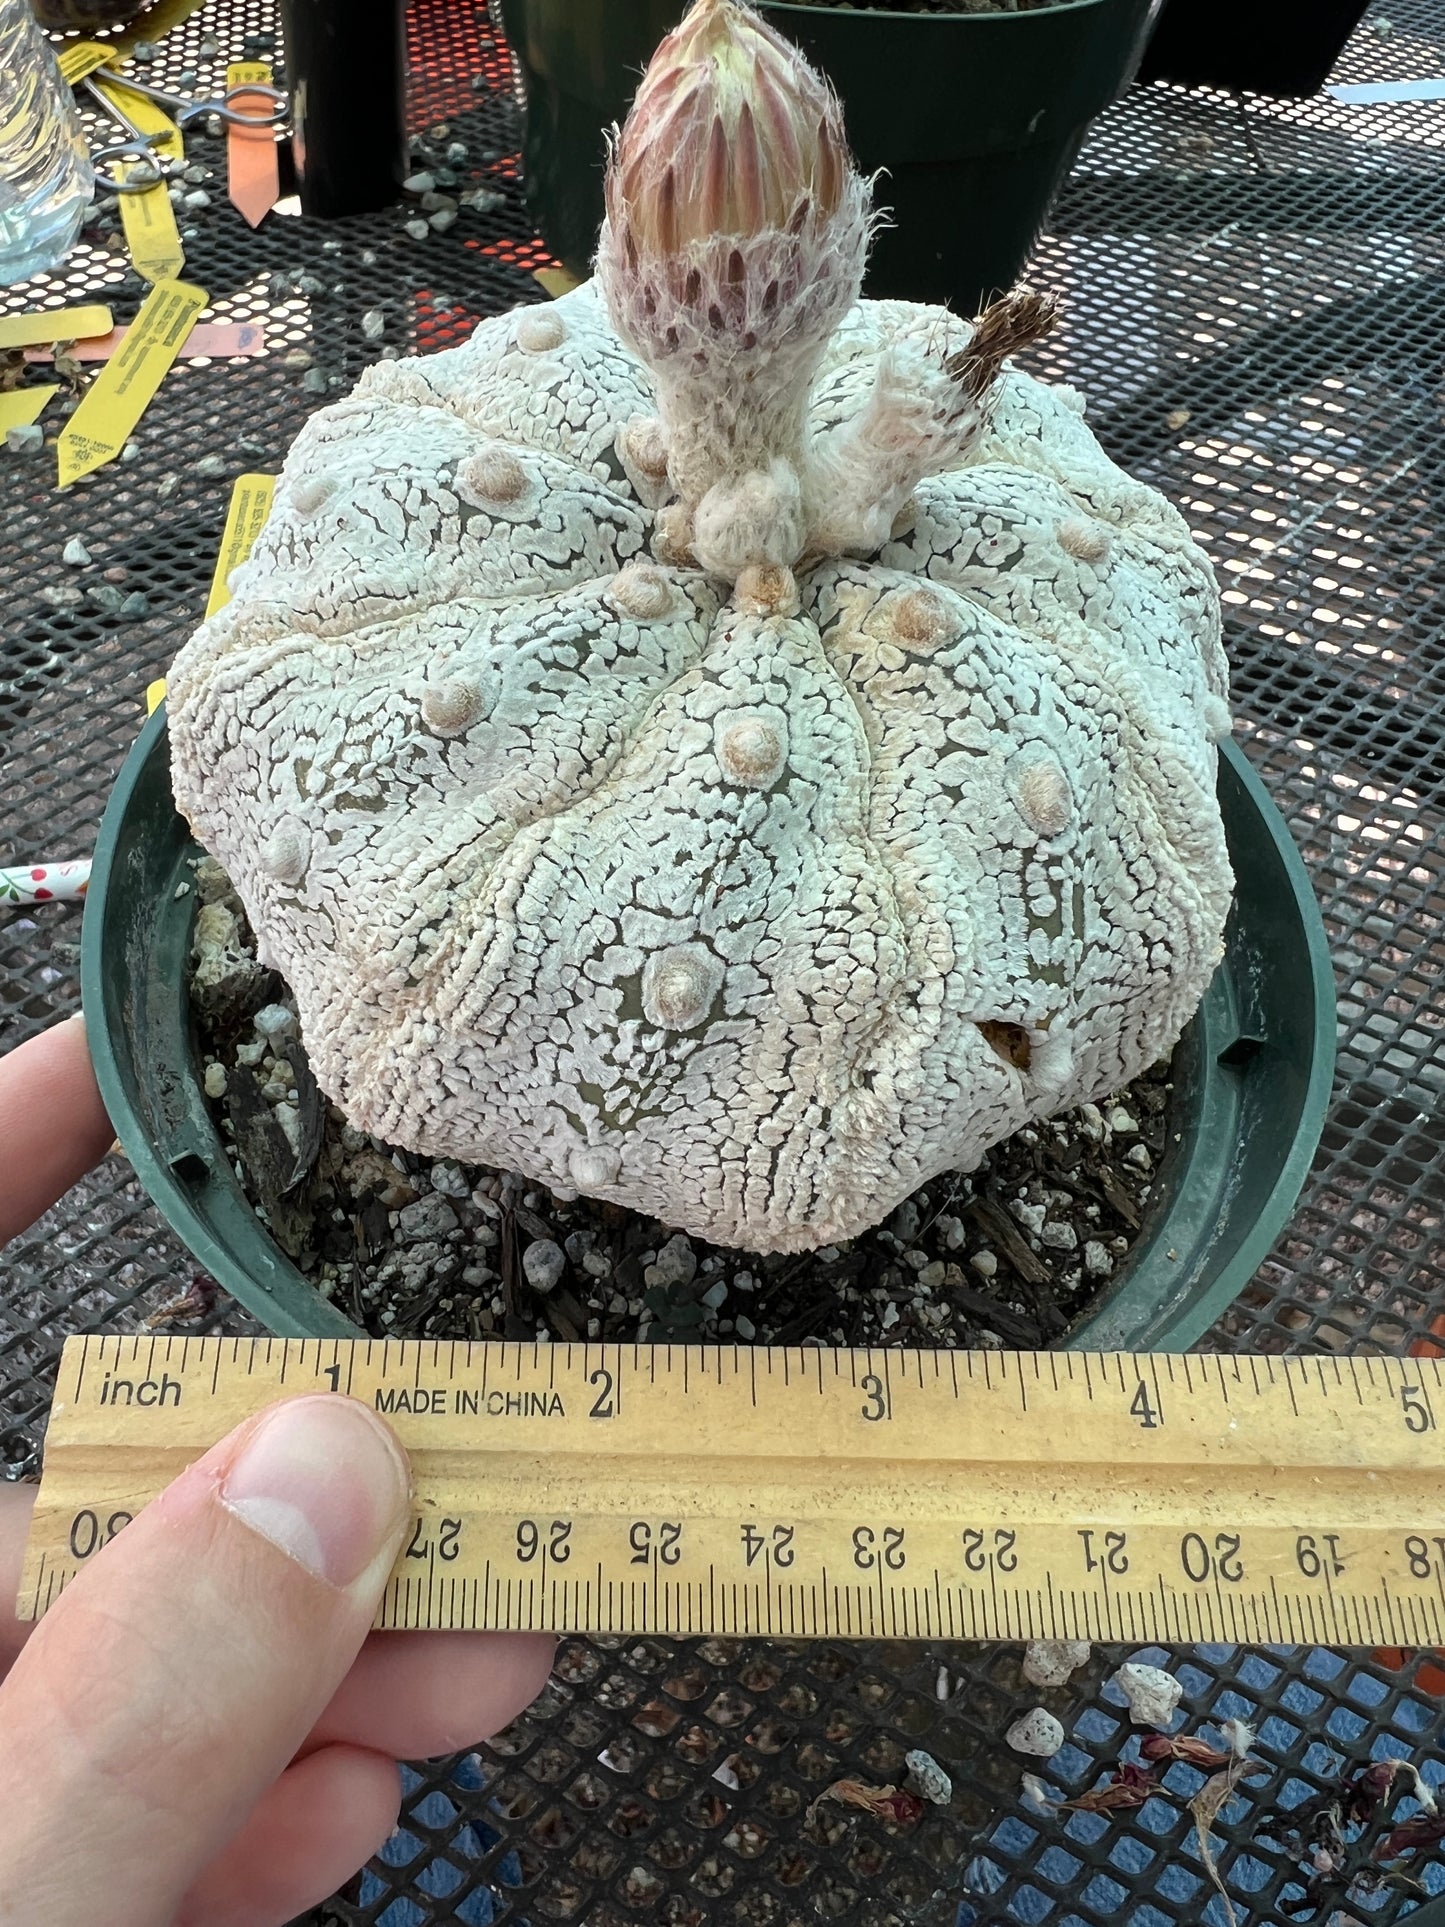 Astrophytum super kabuto cactus in 6 inch pot from bills collection